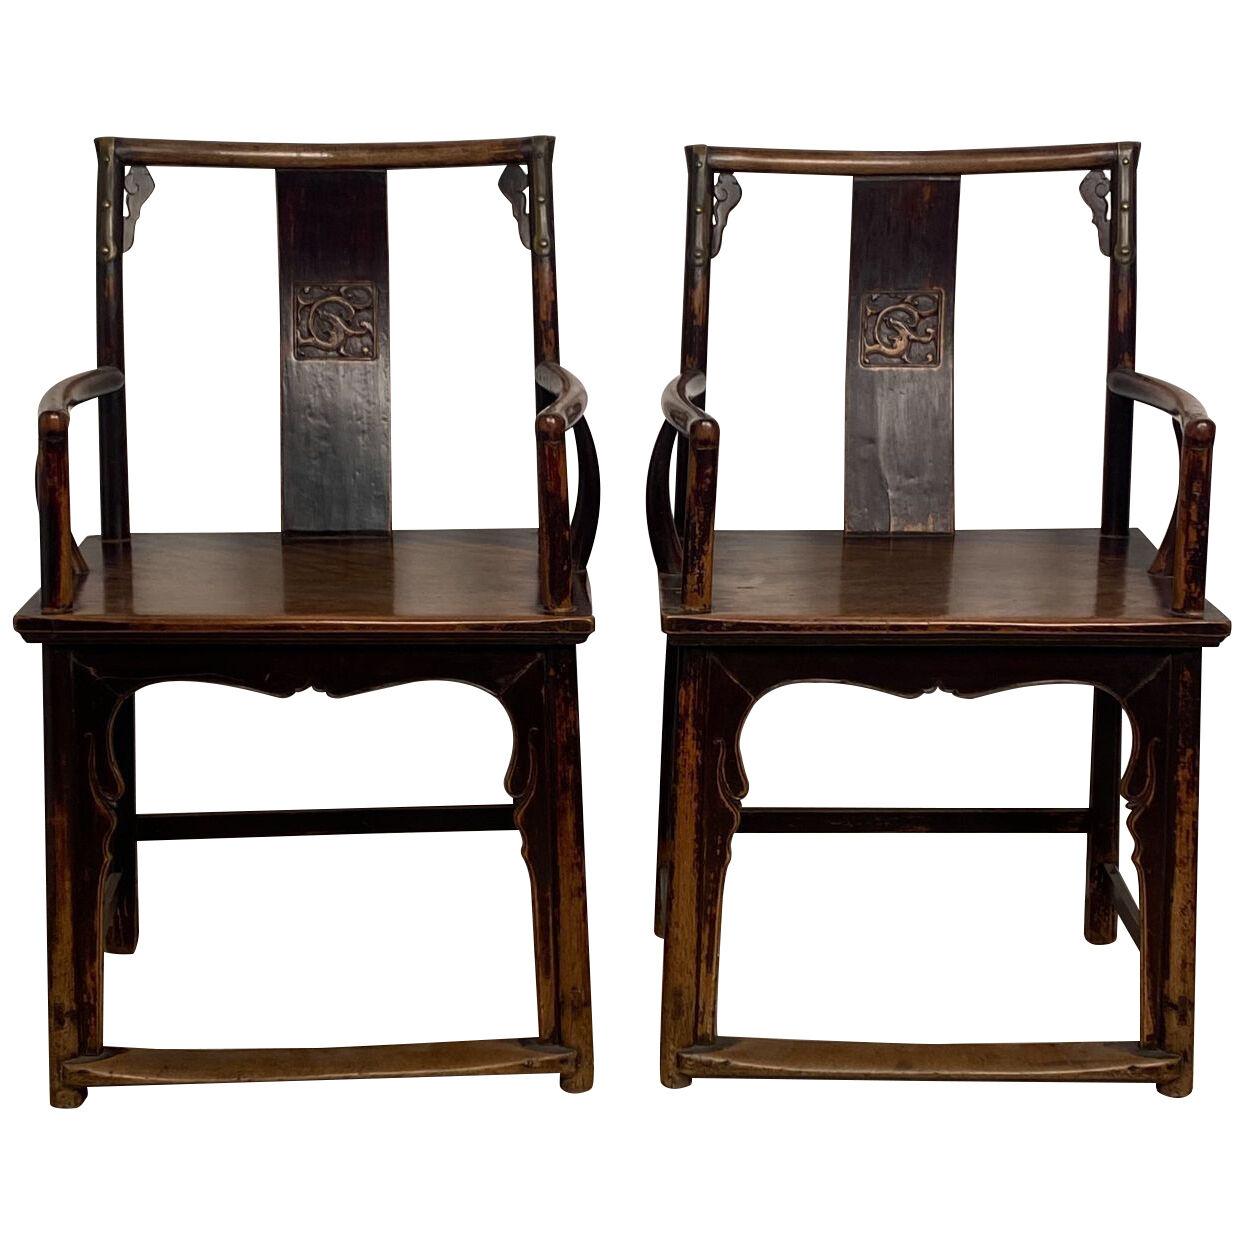 Pair of 18th-Century Chinese Armchairs